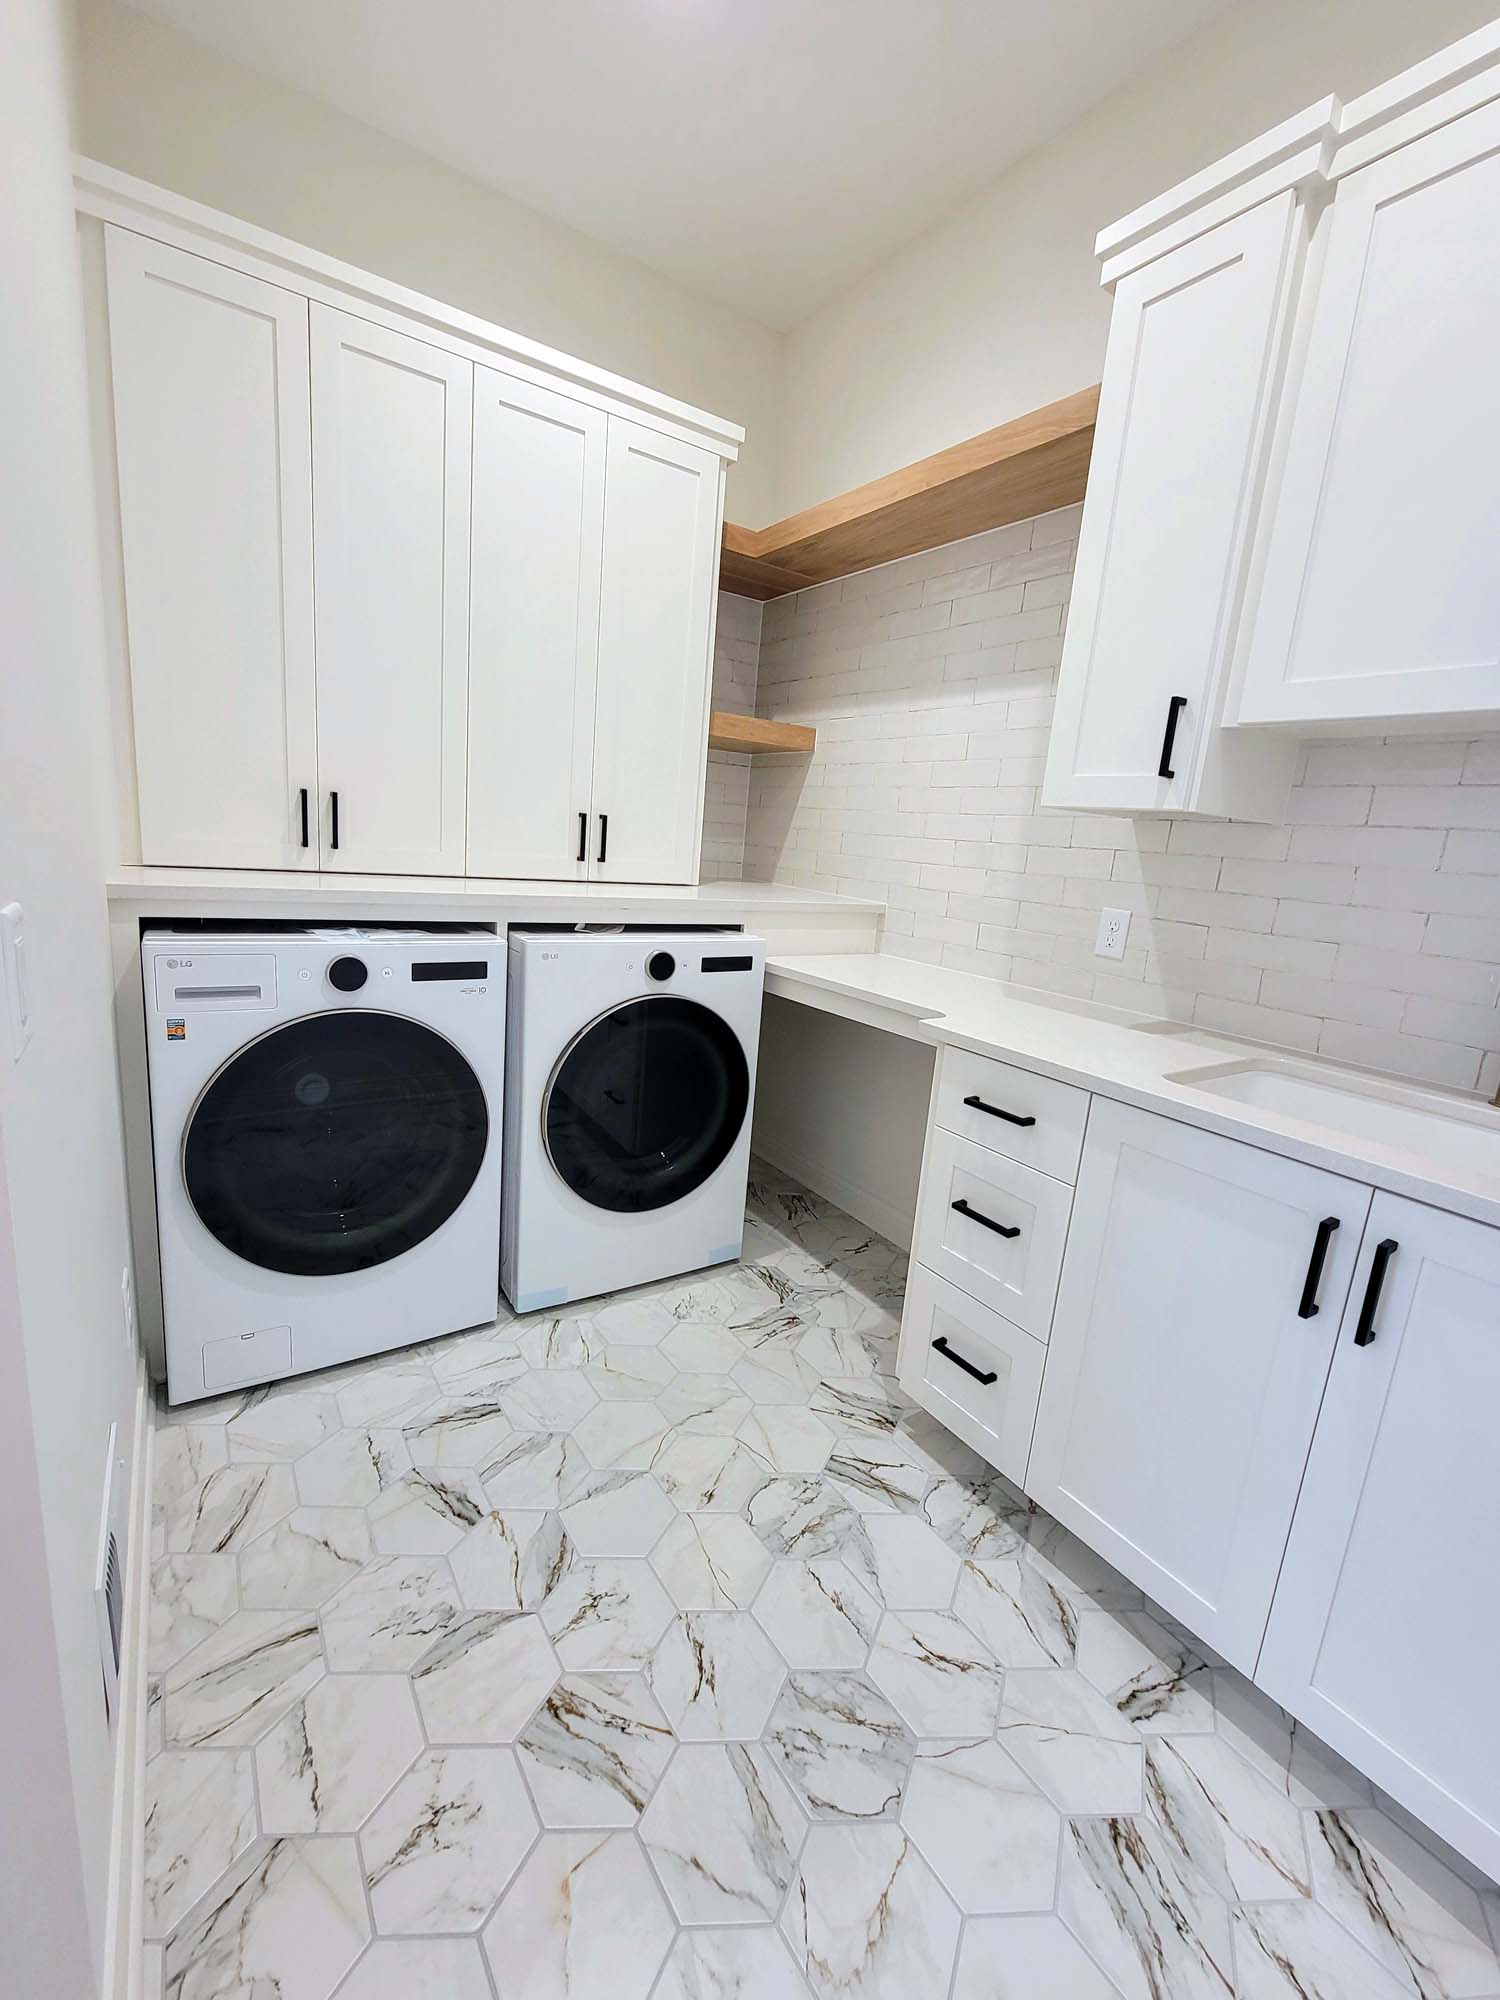 Laundry room with lots of cabinet and counter space